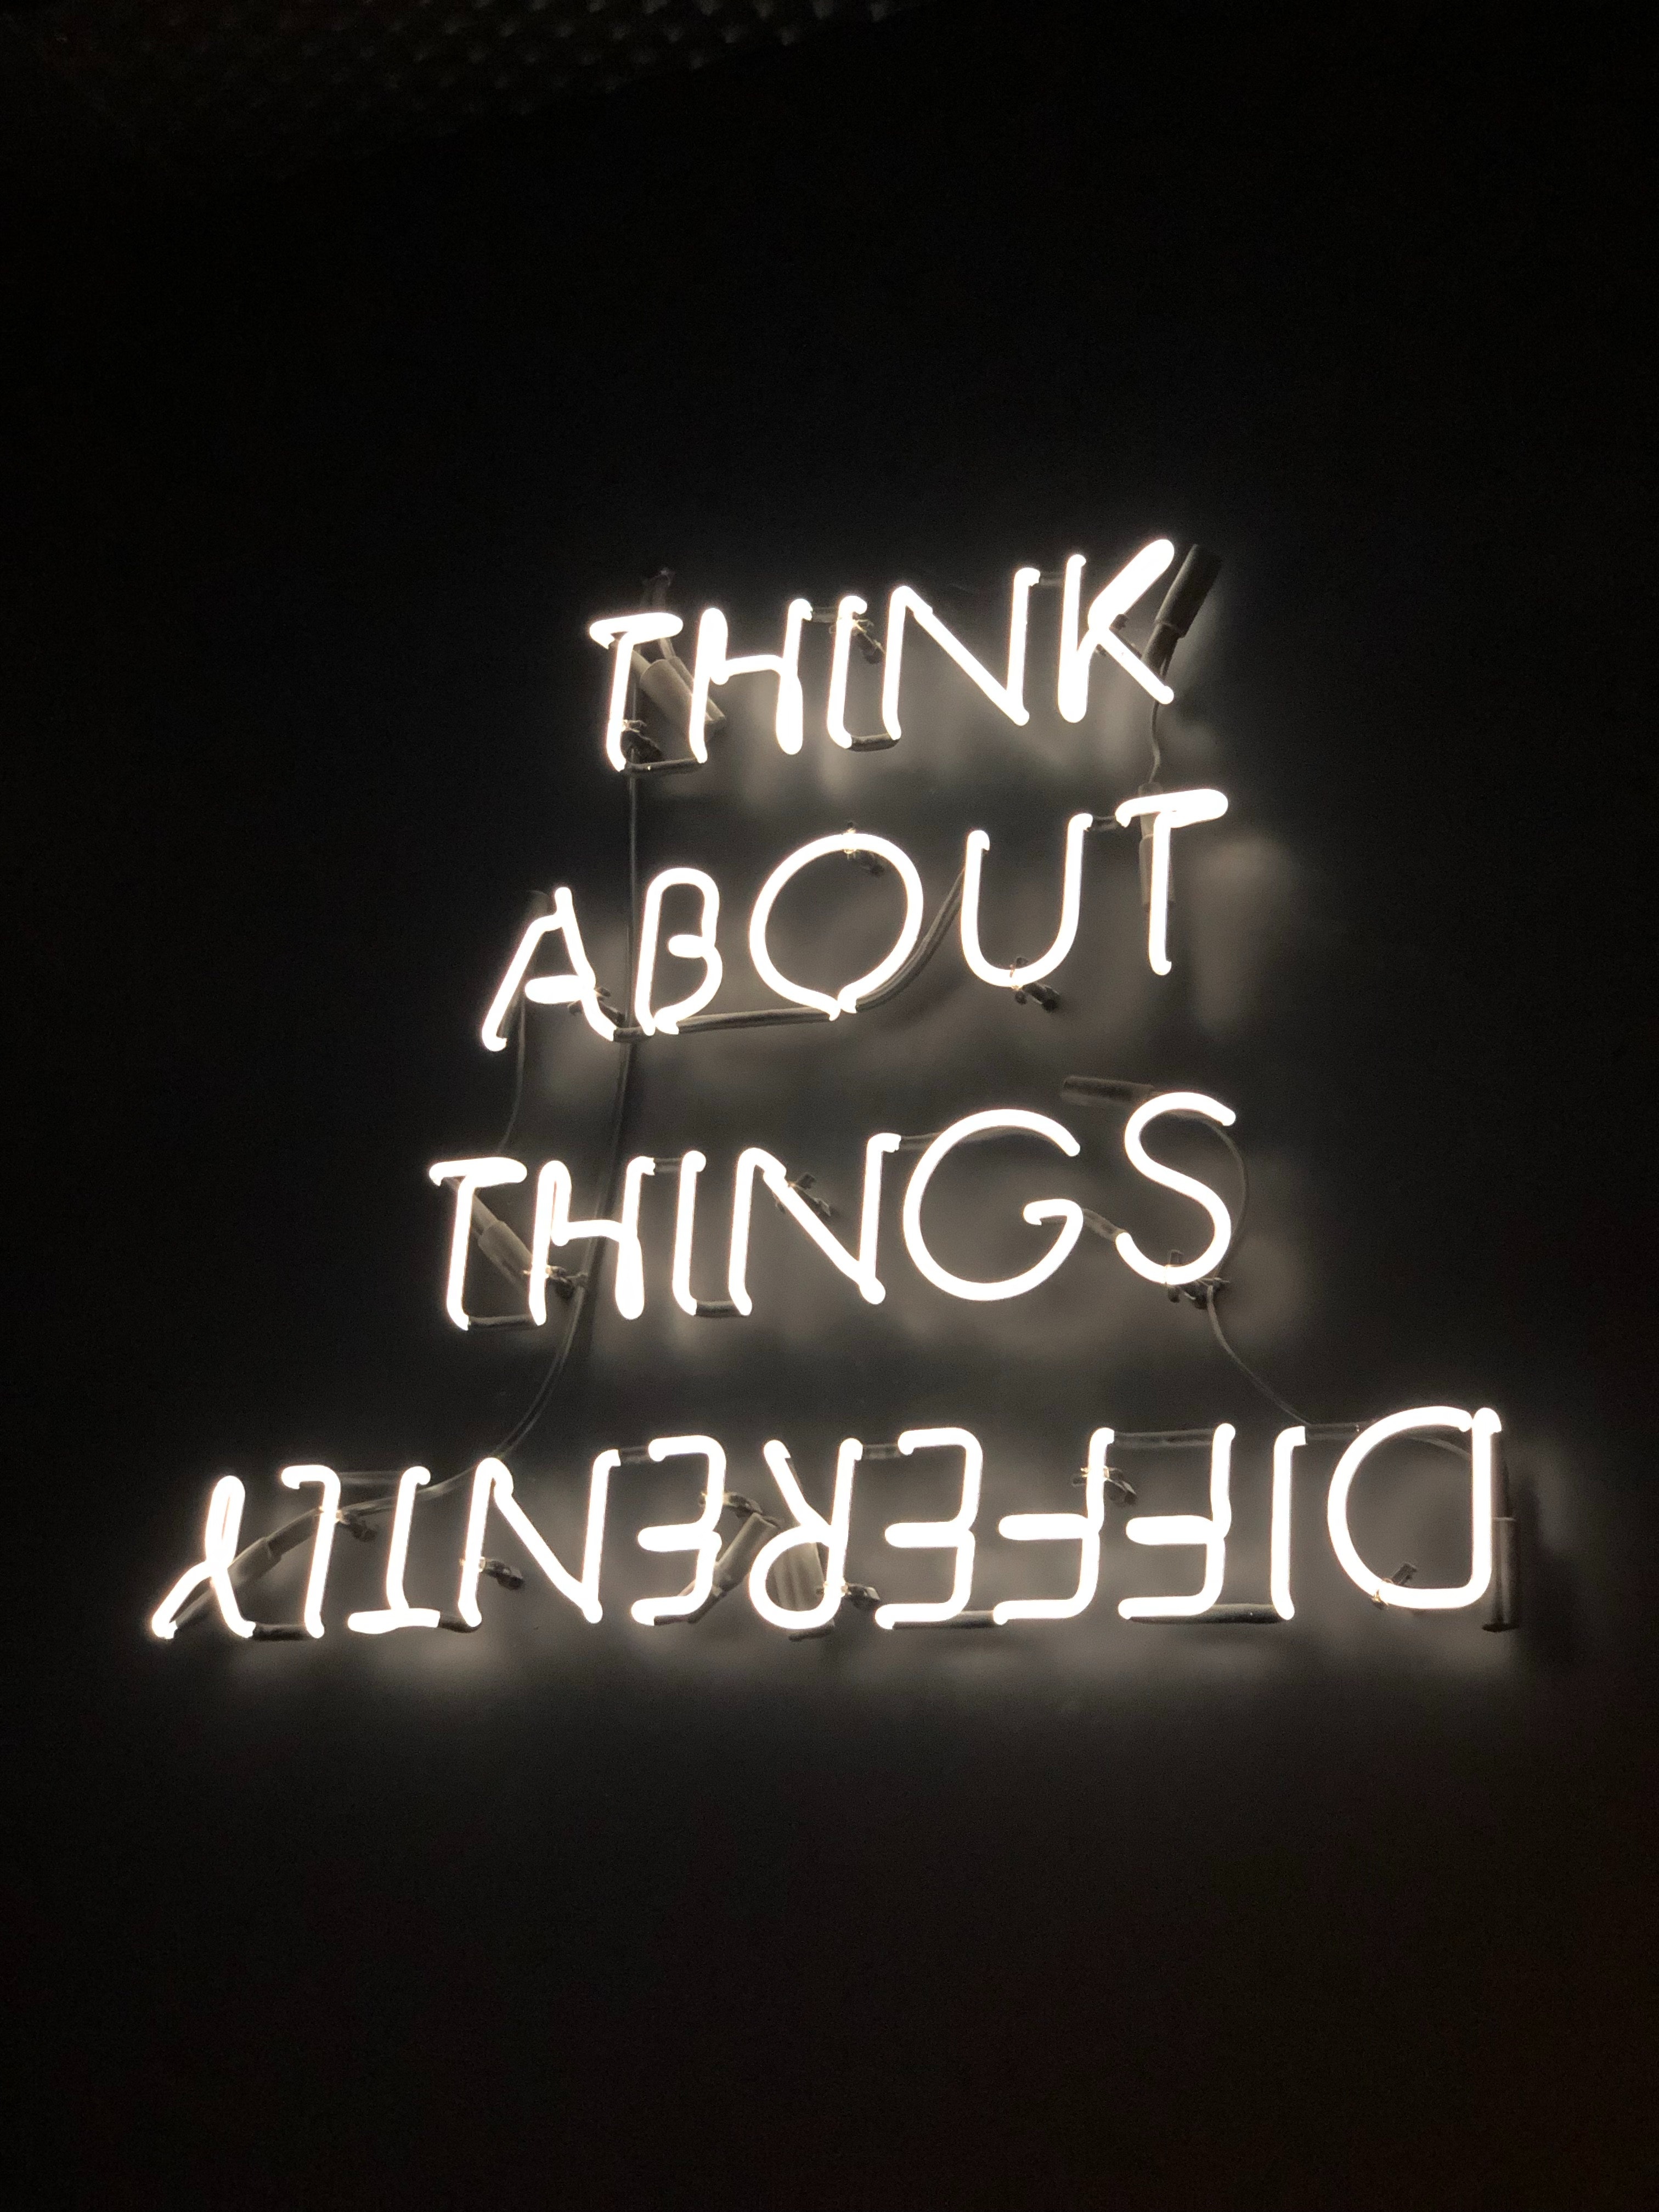 "Think about things differently" in neon lights